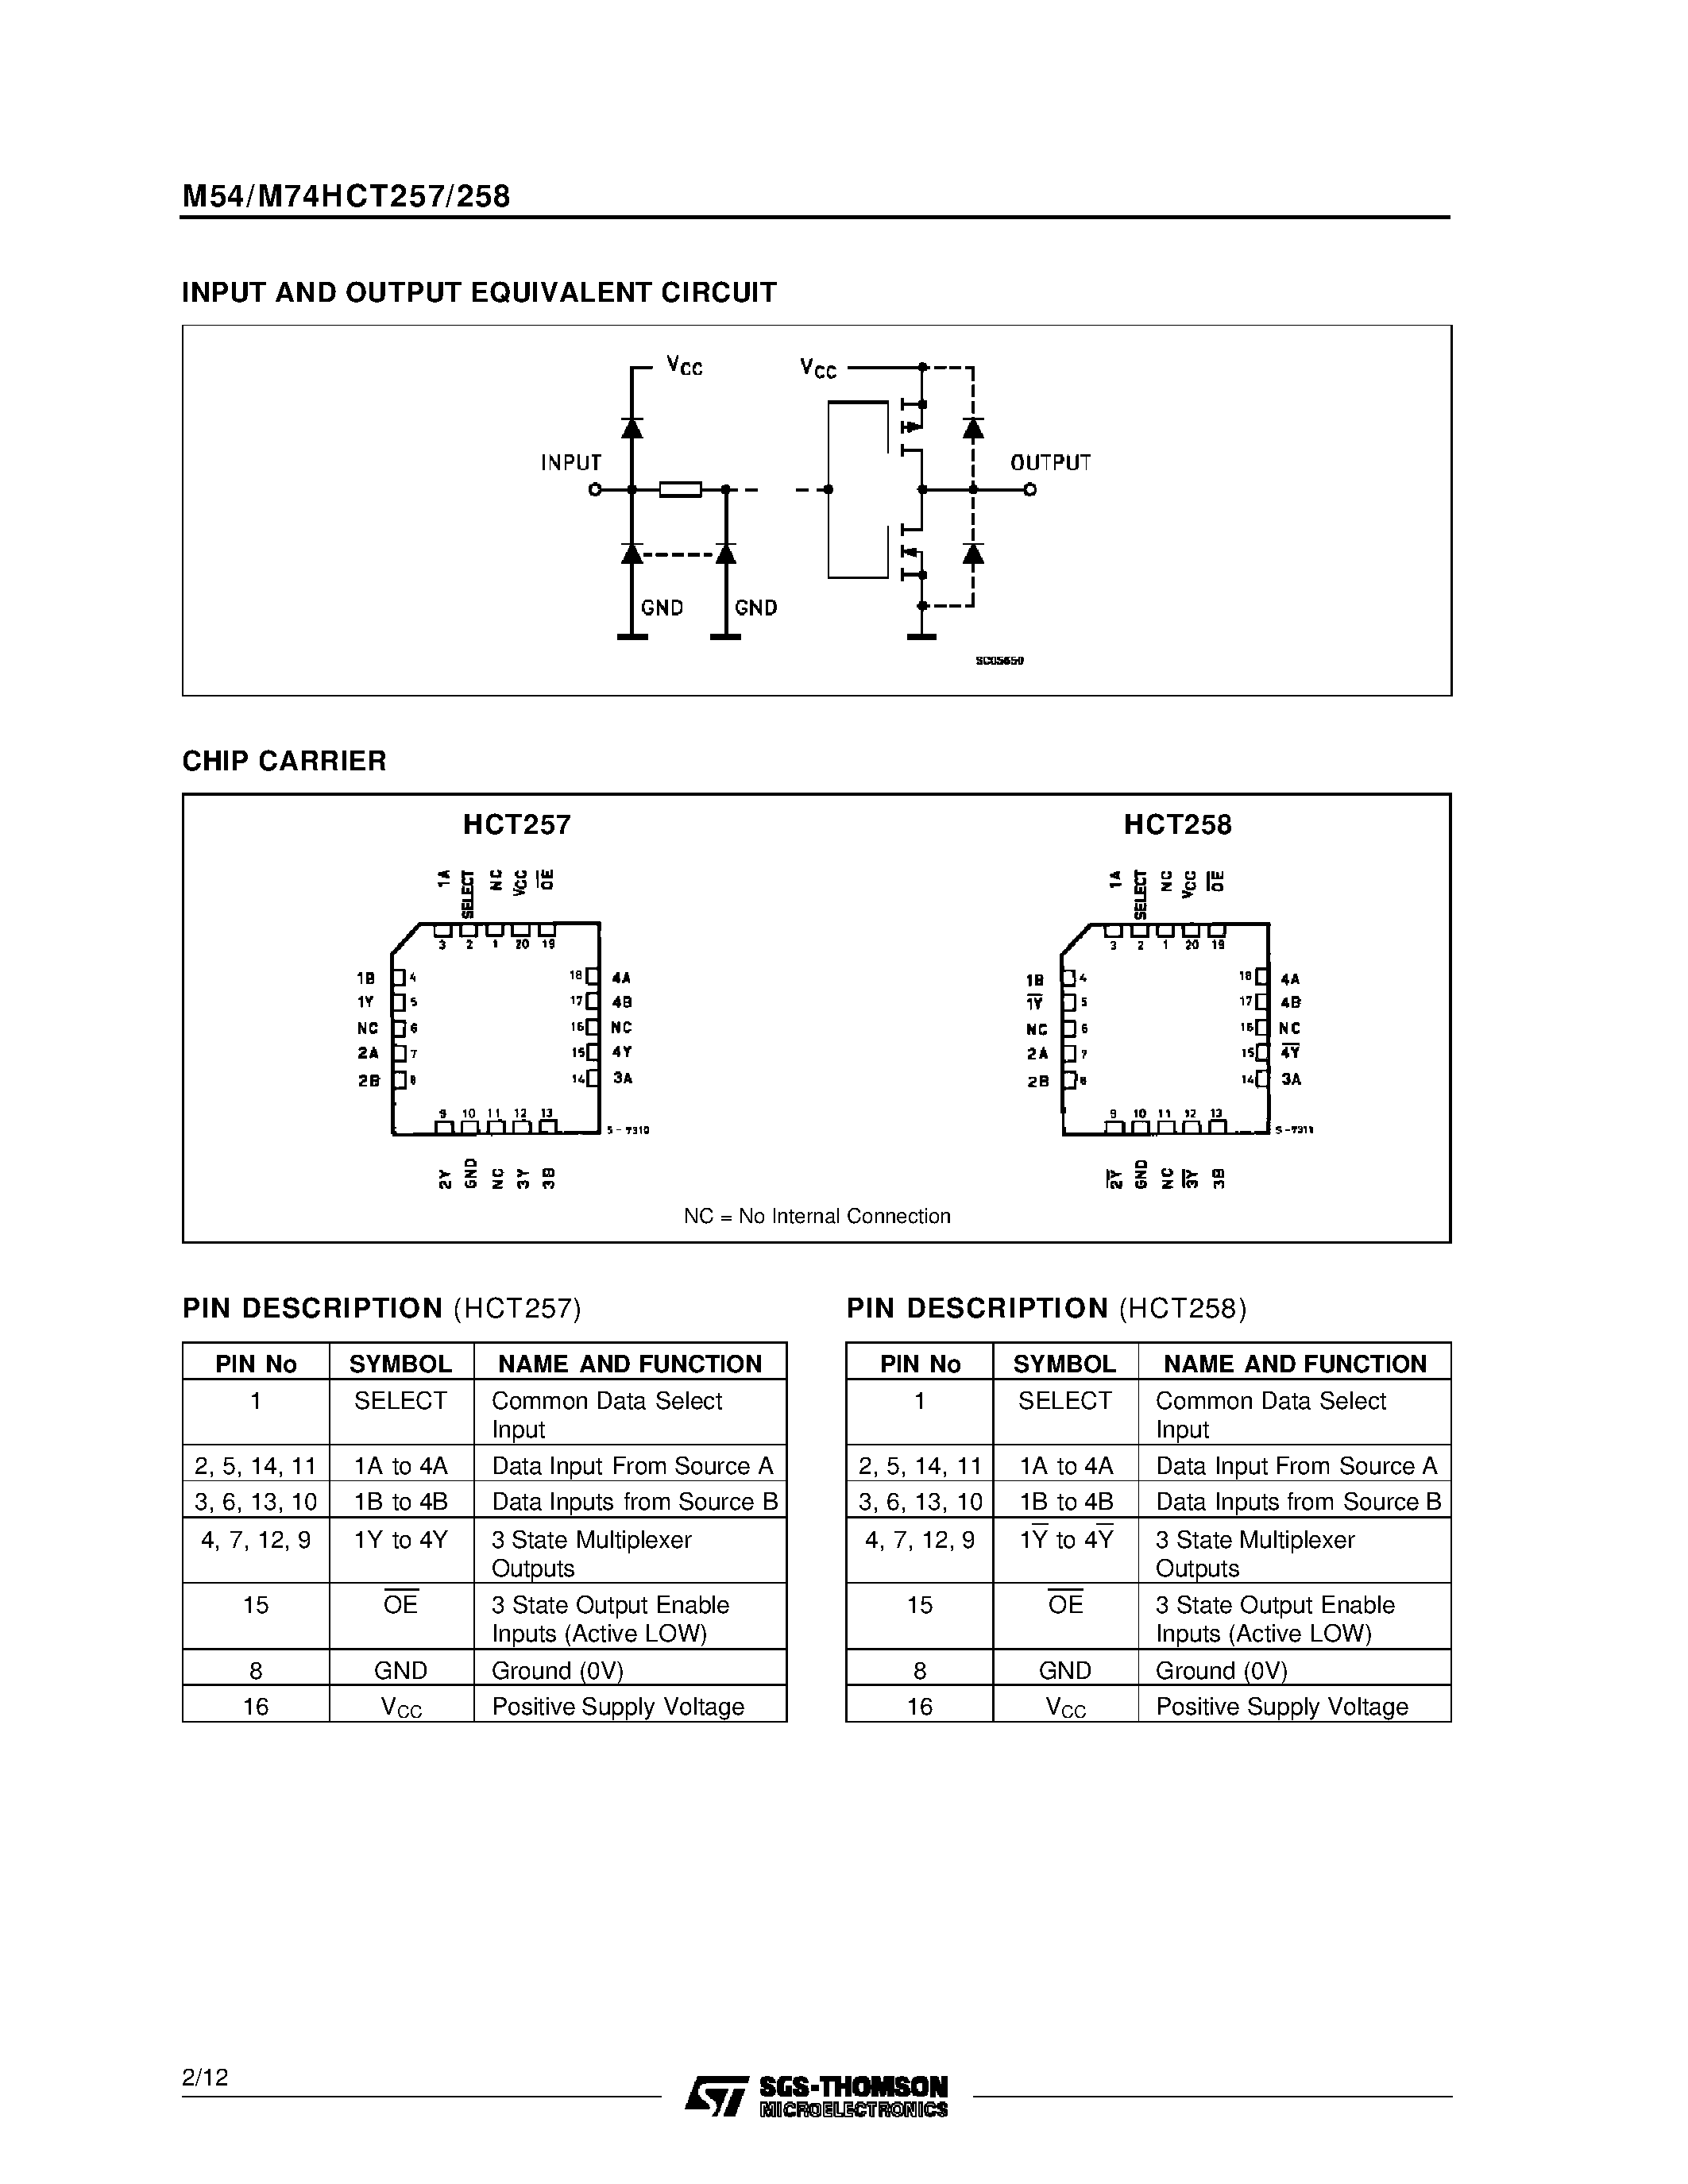 Datasheet M74HCT258 - HCT257 QUAD 2 CHANNEL MULTIPLEXER 3-STATE HCT258 QUAD 2 CHANNEL MULTIPLEXER 3-STATE / INVERTING page 2